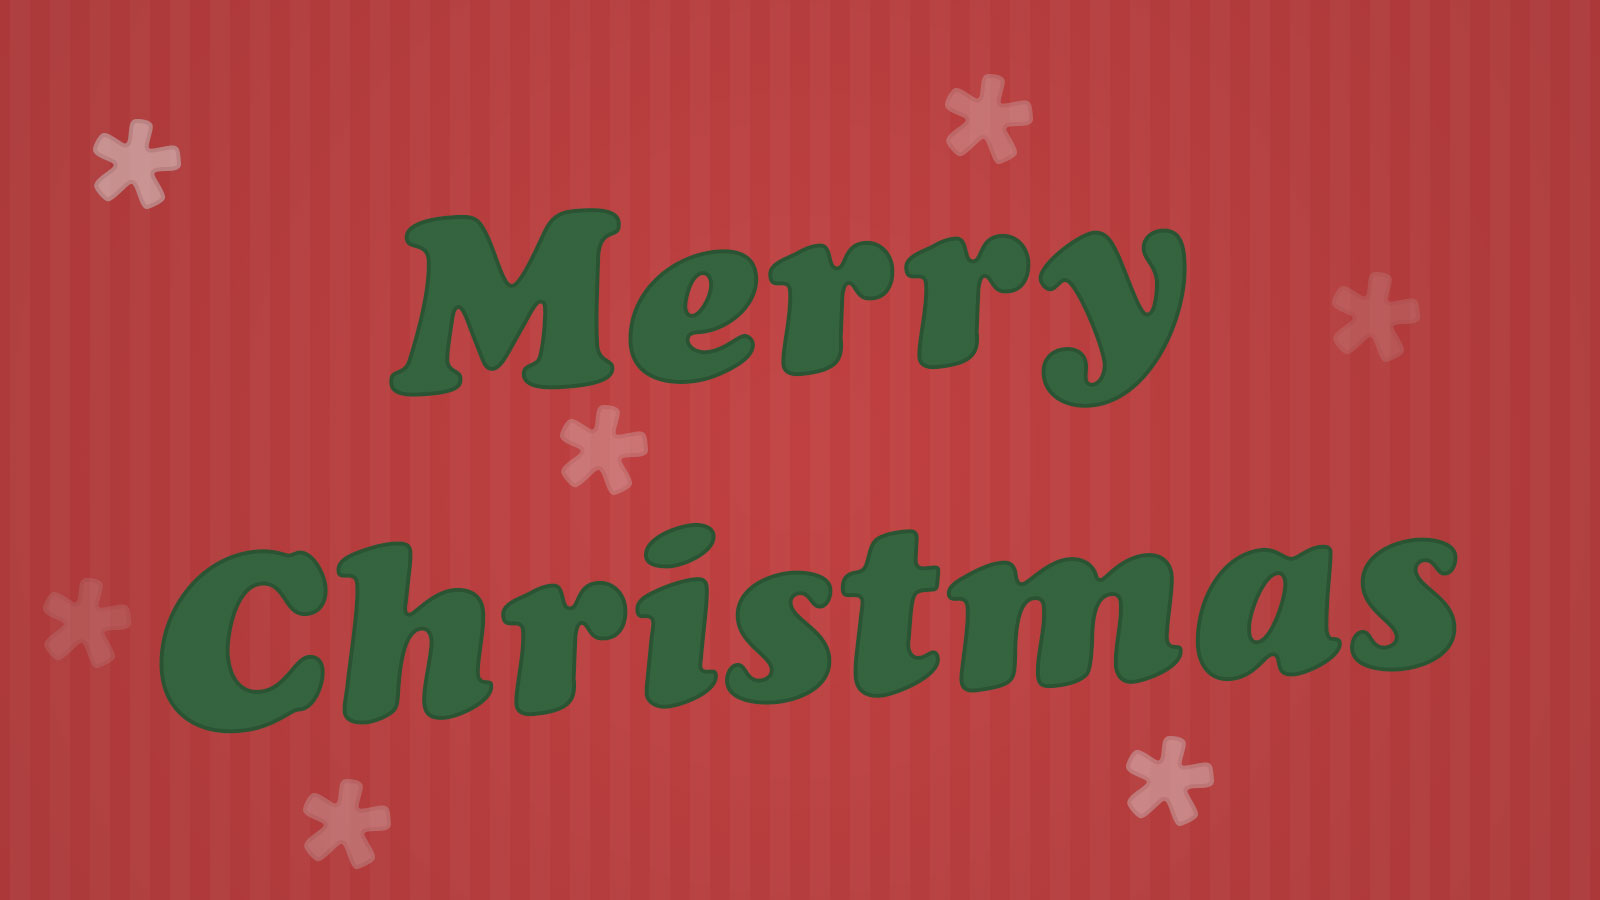 Merry Christmas text over a red striped background with snow flakes.